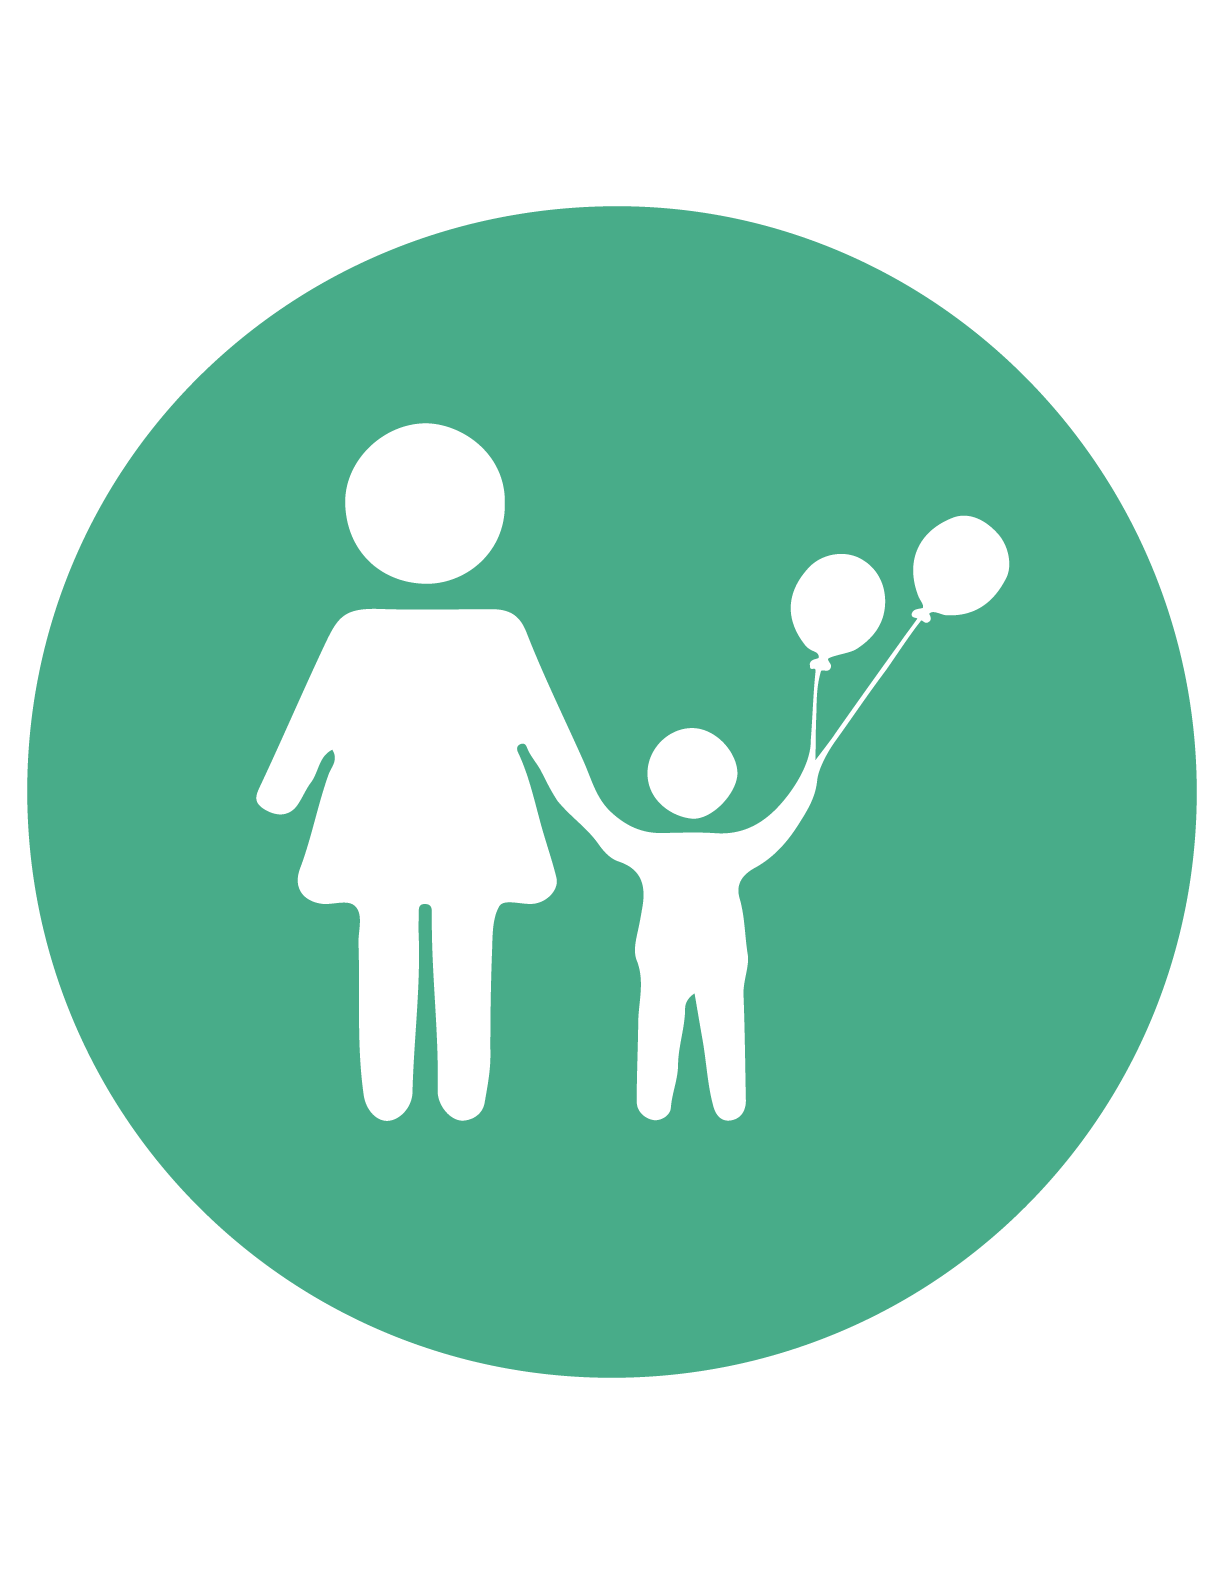 Mom and child holding balloons icon